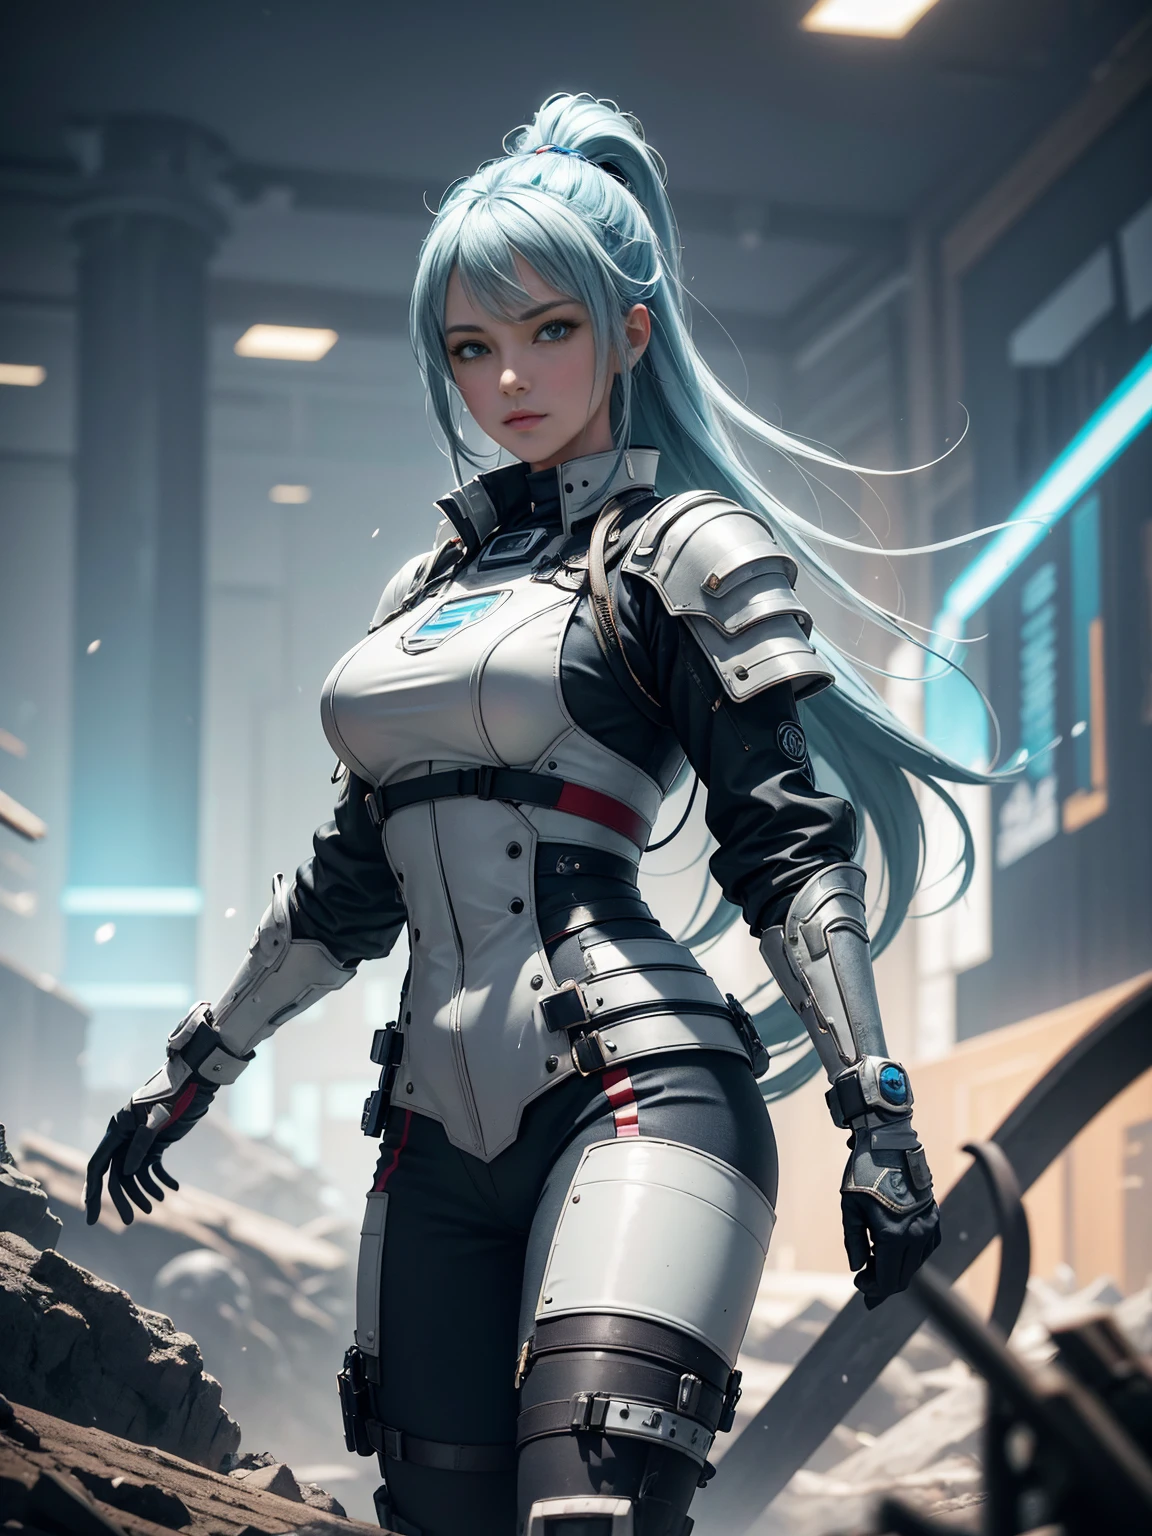 ((Best quality)), ((masterpiece)), (detailed:1.4), 3D, an image of a beautiful cyberpunk female, straight long hair, Ice Blue hair, beautiful blue eyes, detail shot, HDR (High Dynamic Range),Ray Tracing,NVIDIA RTX,Super-Resolution,Unreal 5,Subsurface scattering,PBR Texturing,Post-processing,Anisotropic Filtering,Depth-of-field,Maximum clarity and sharpness,Multi-layered textures,Albedo and Specular maps,Surface shading,Accurate simulation of light-material interaction,Perfect proportions,Octane Render,Two-tone lighting,Wide aperture,Low ISO,White balance,Rule of thirds,8K RAW,